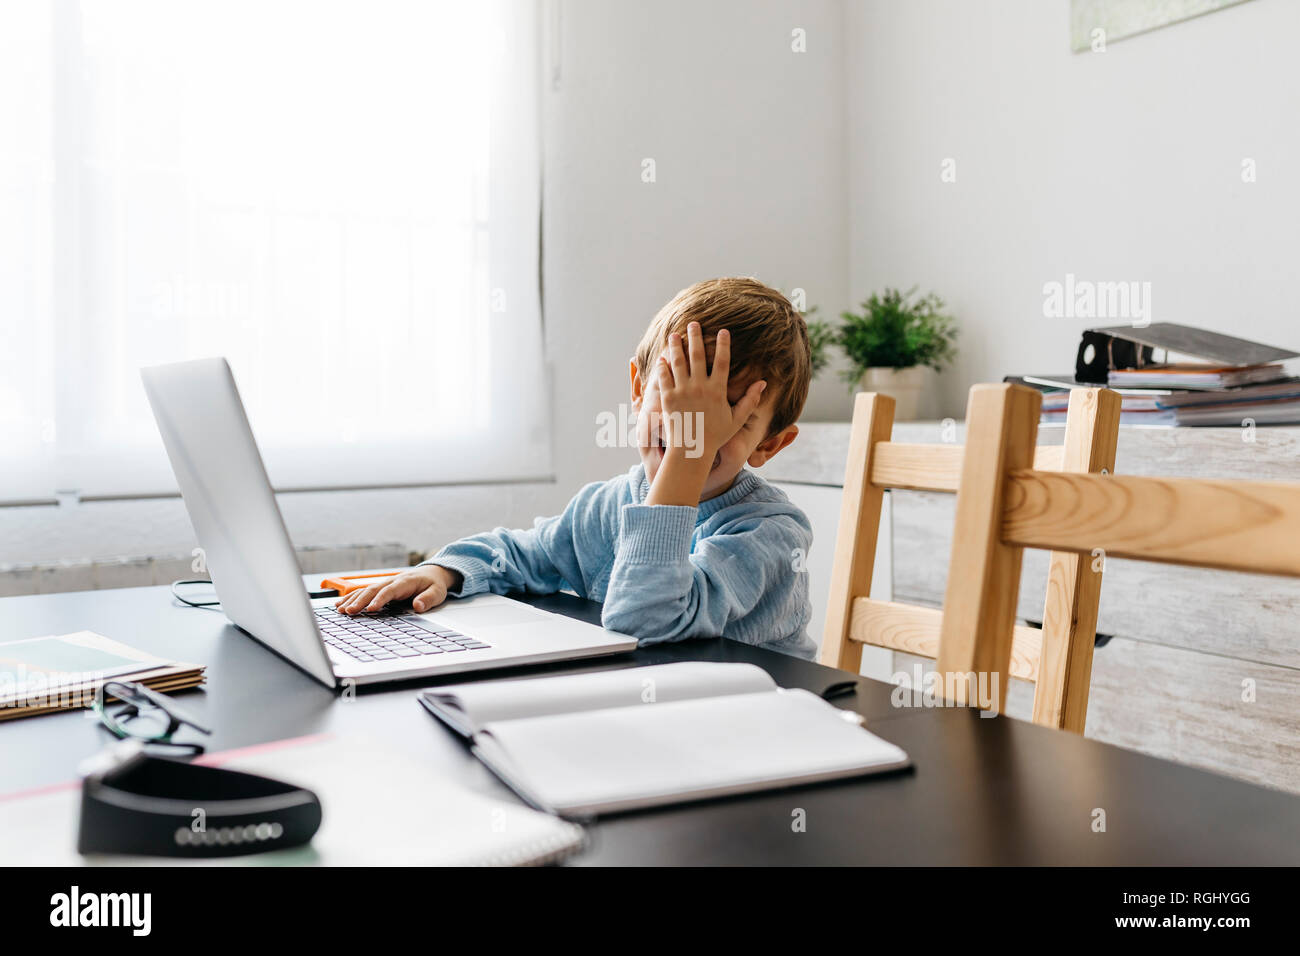 Little boy sitting in his father's office, using laptop Stock Photo